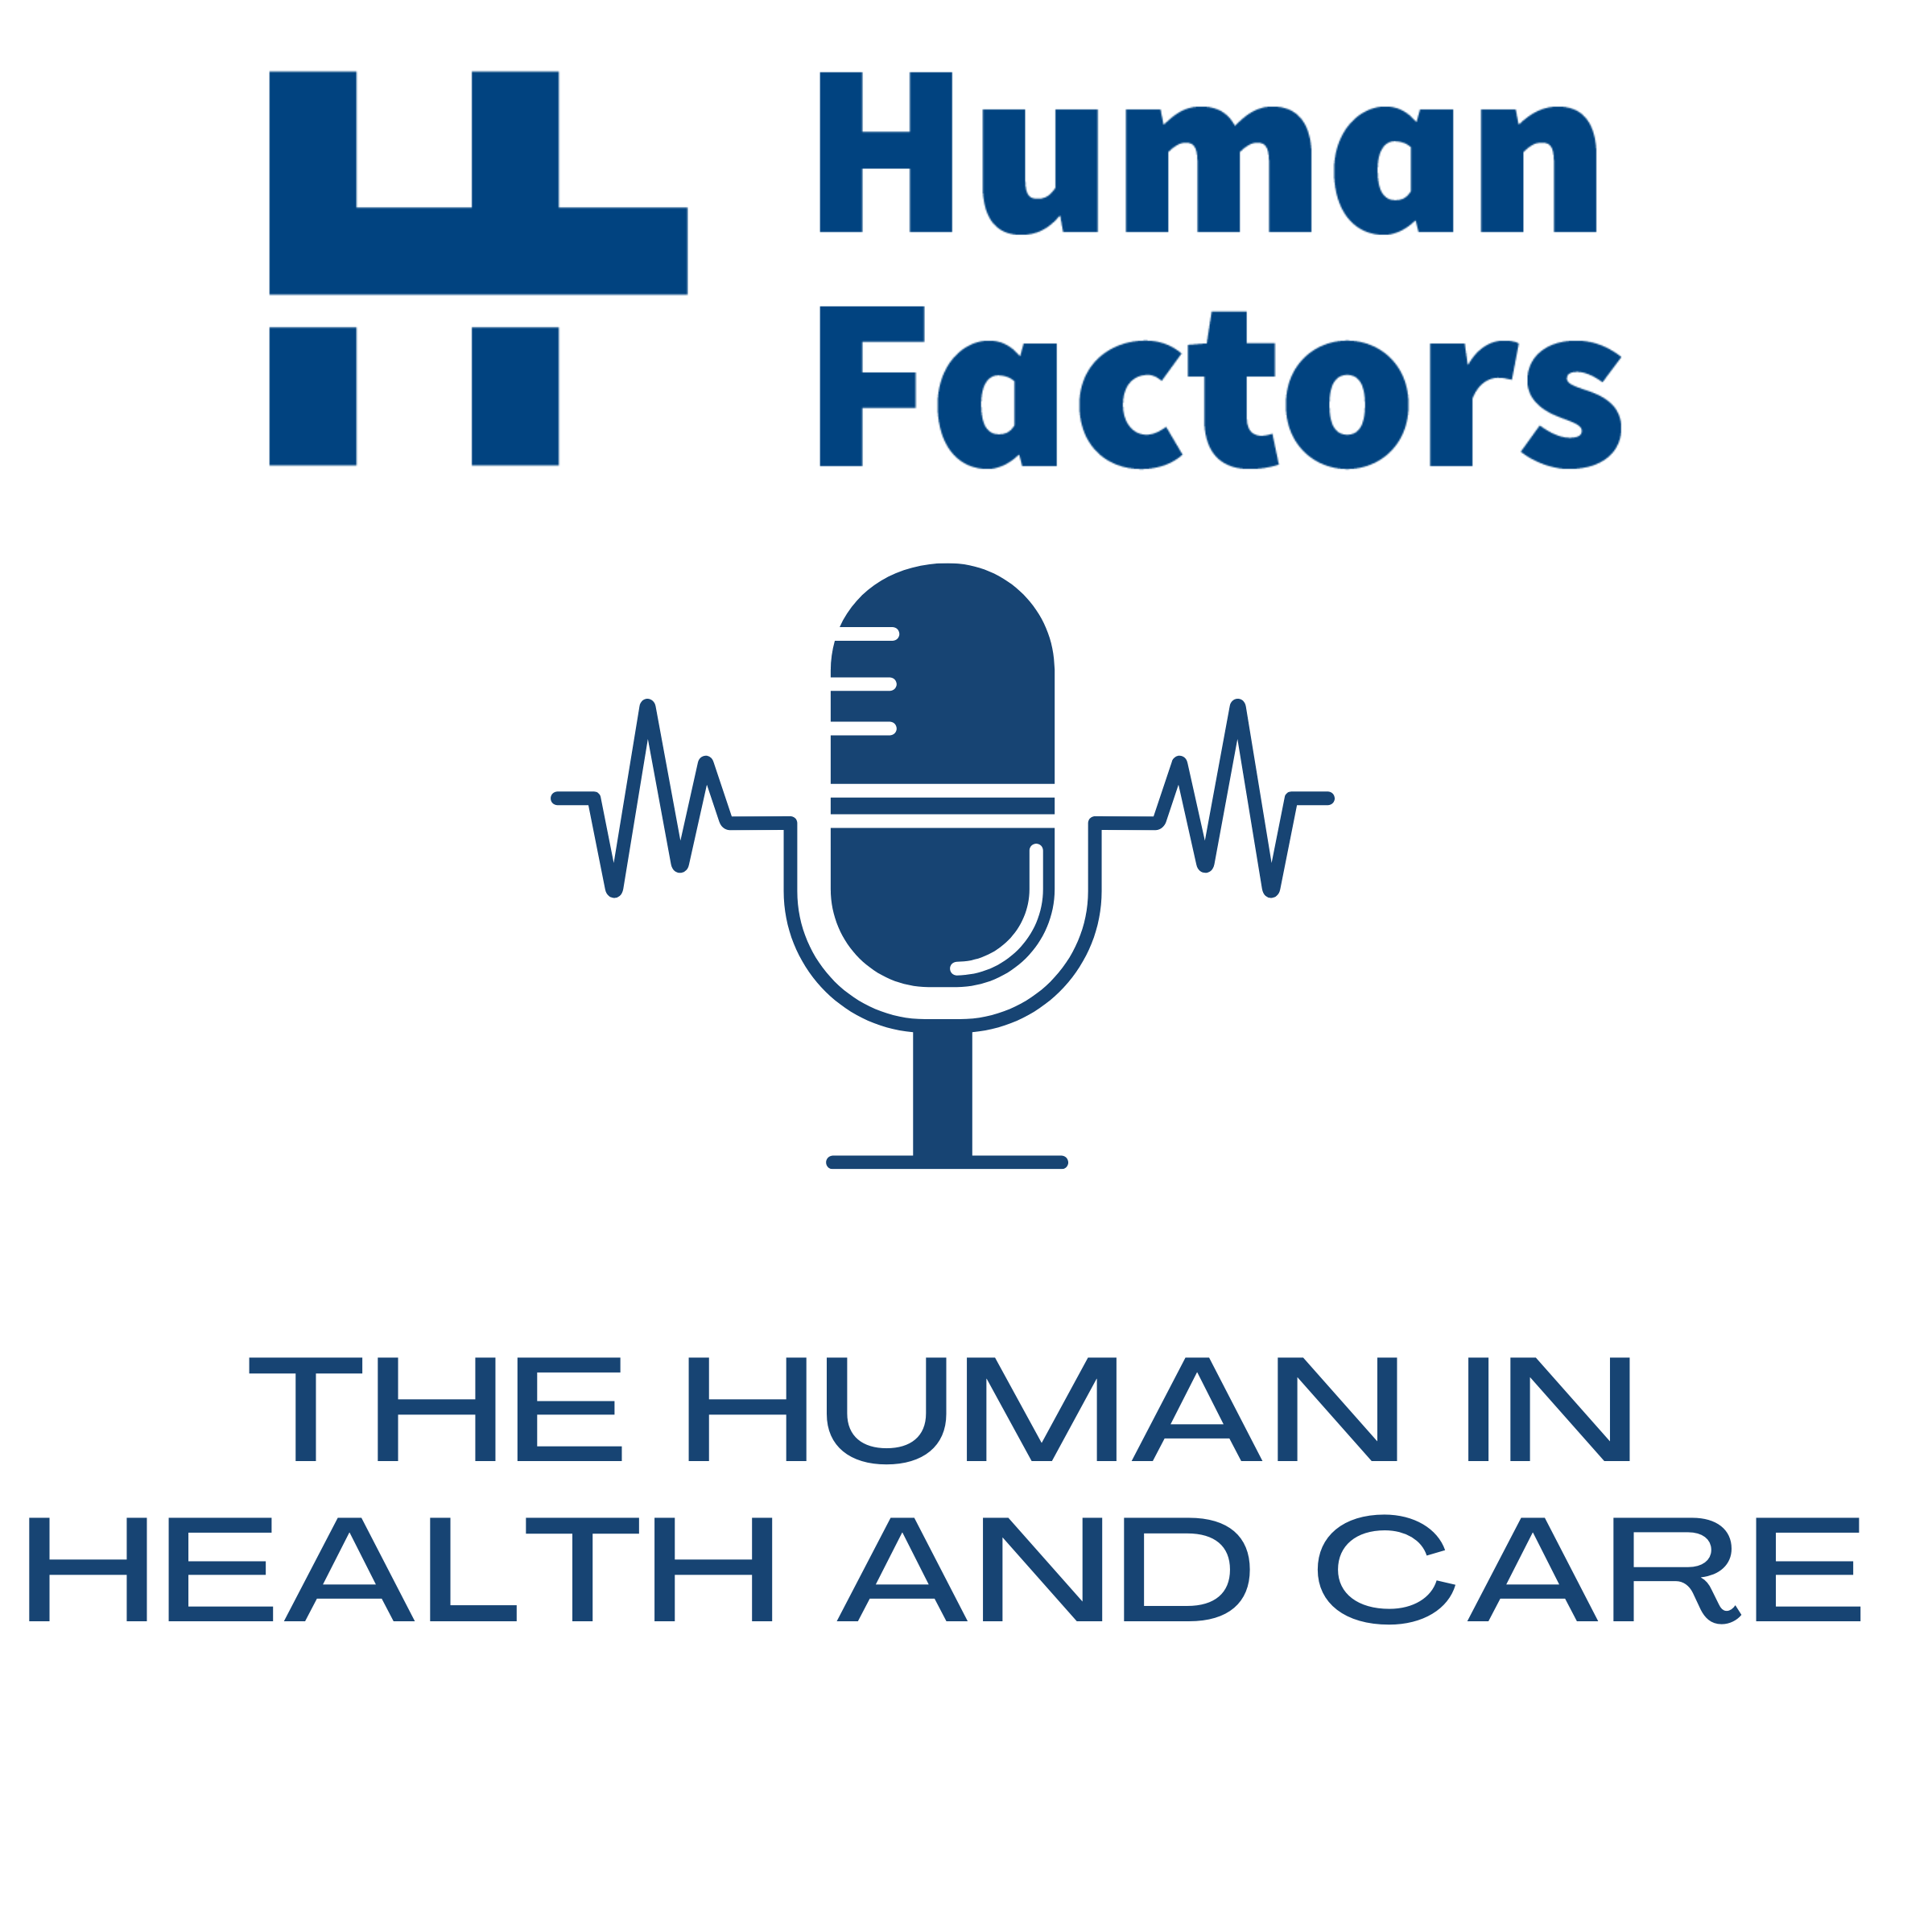 The Human in Health and Care